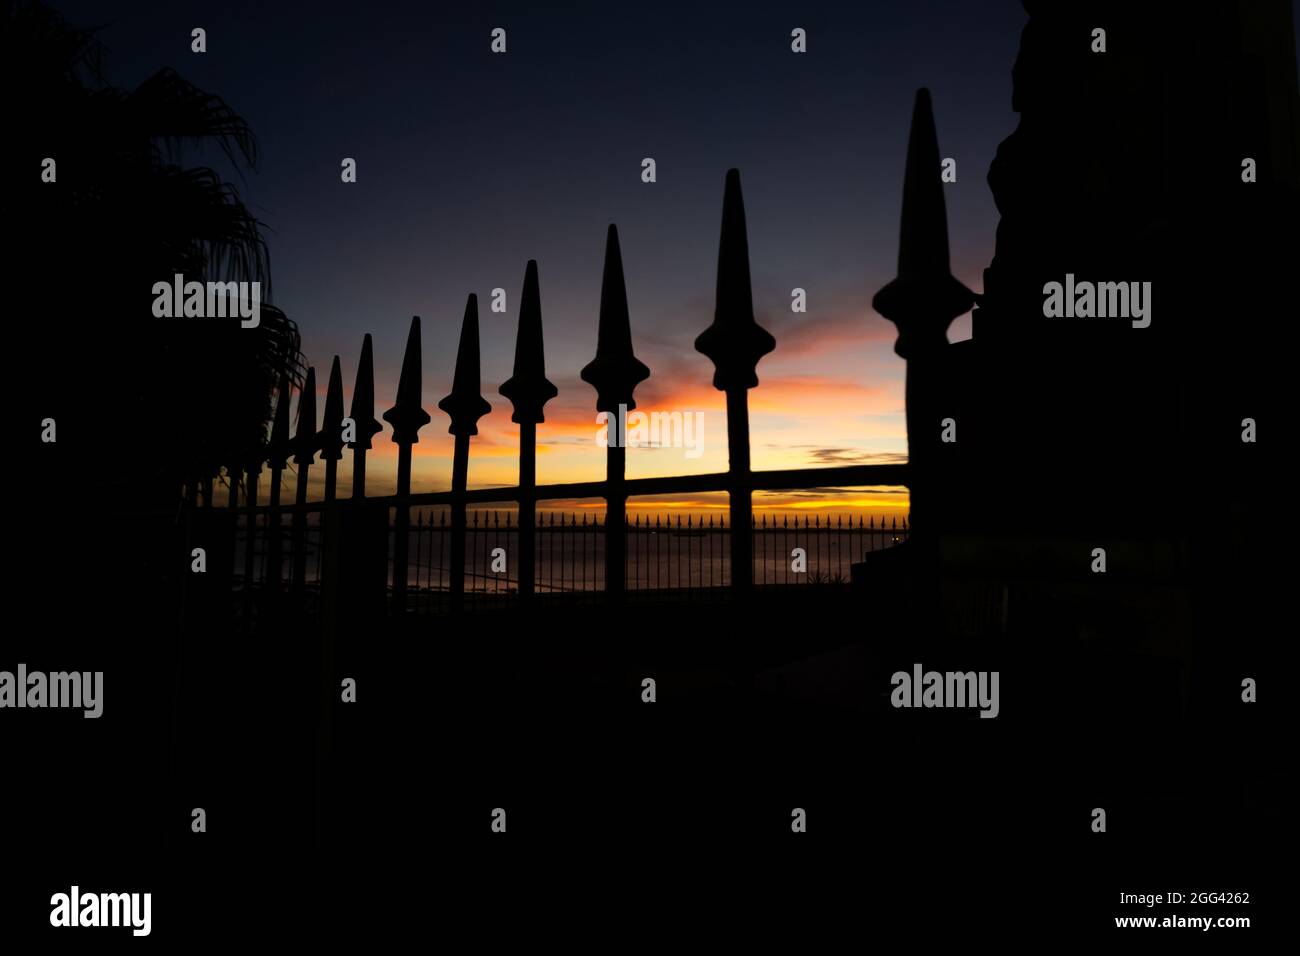 Salvador, Bahia, Brazil - June 11, 2021: Silhouette of railings with spears, trees and a lamp post in the Castro Alves square in Salvador, Bahia. Stock Photo